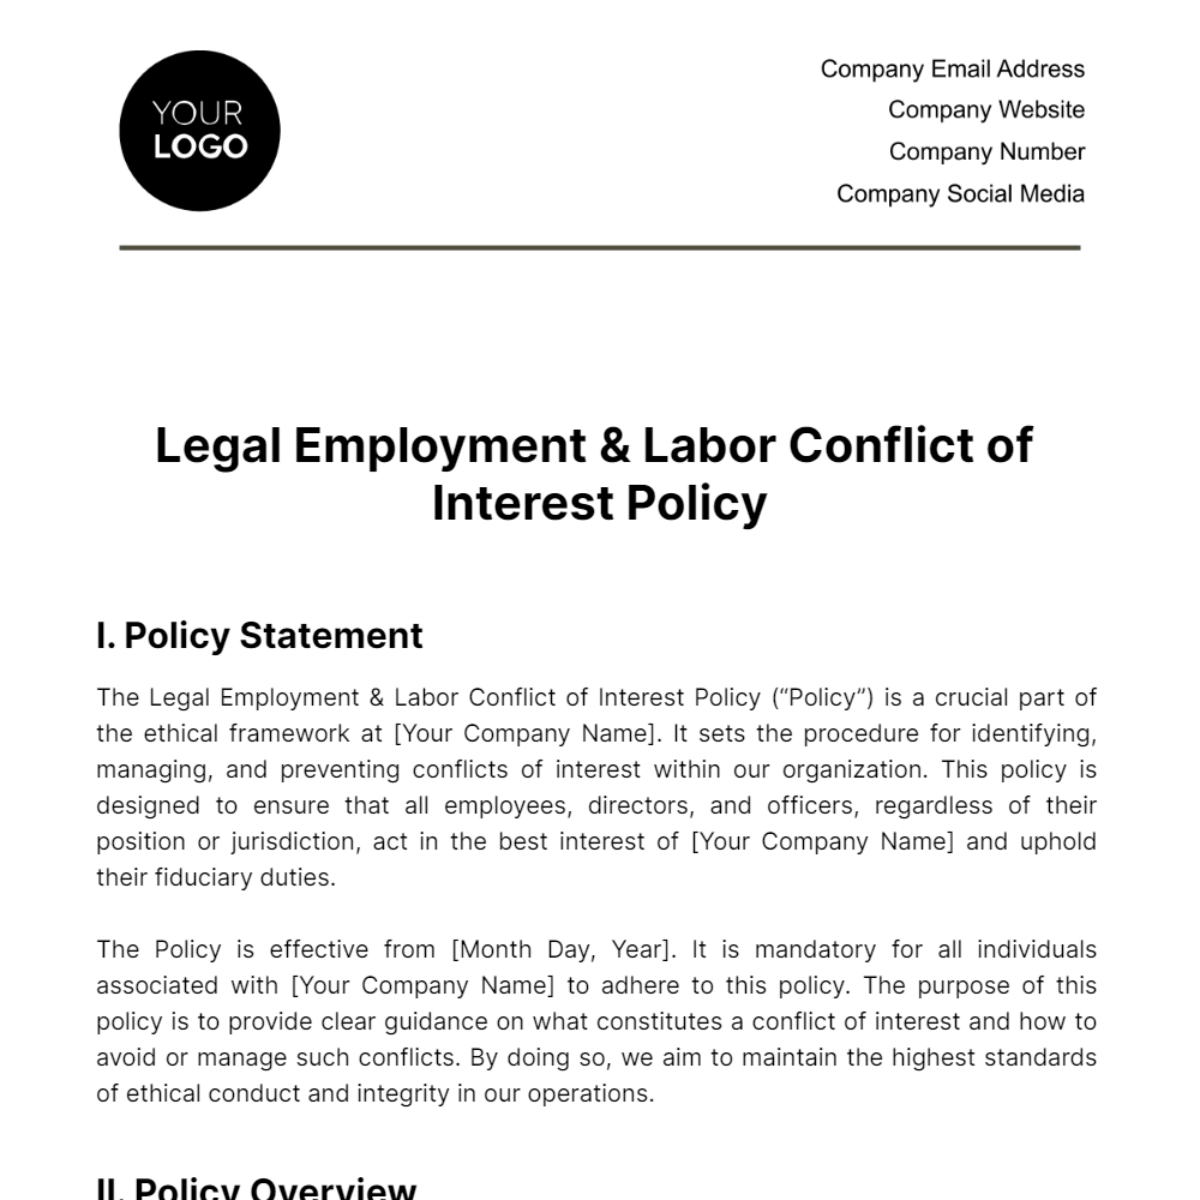 Free Legal Employment & Labor Conflict of Interest Policy Template